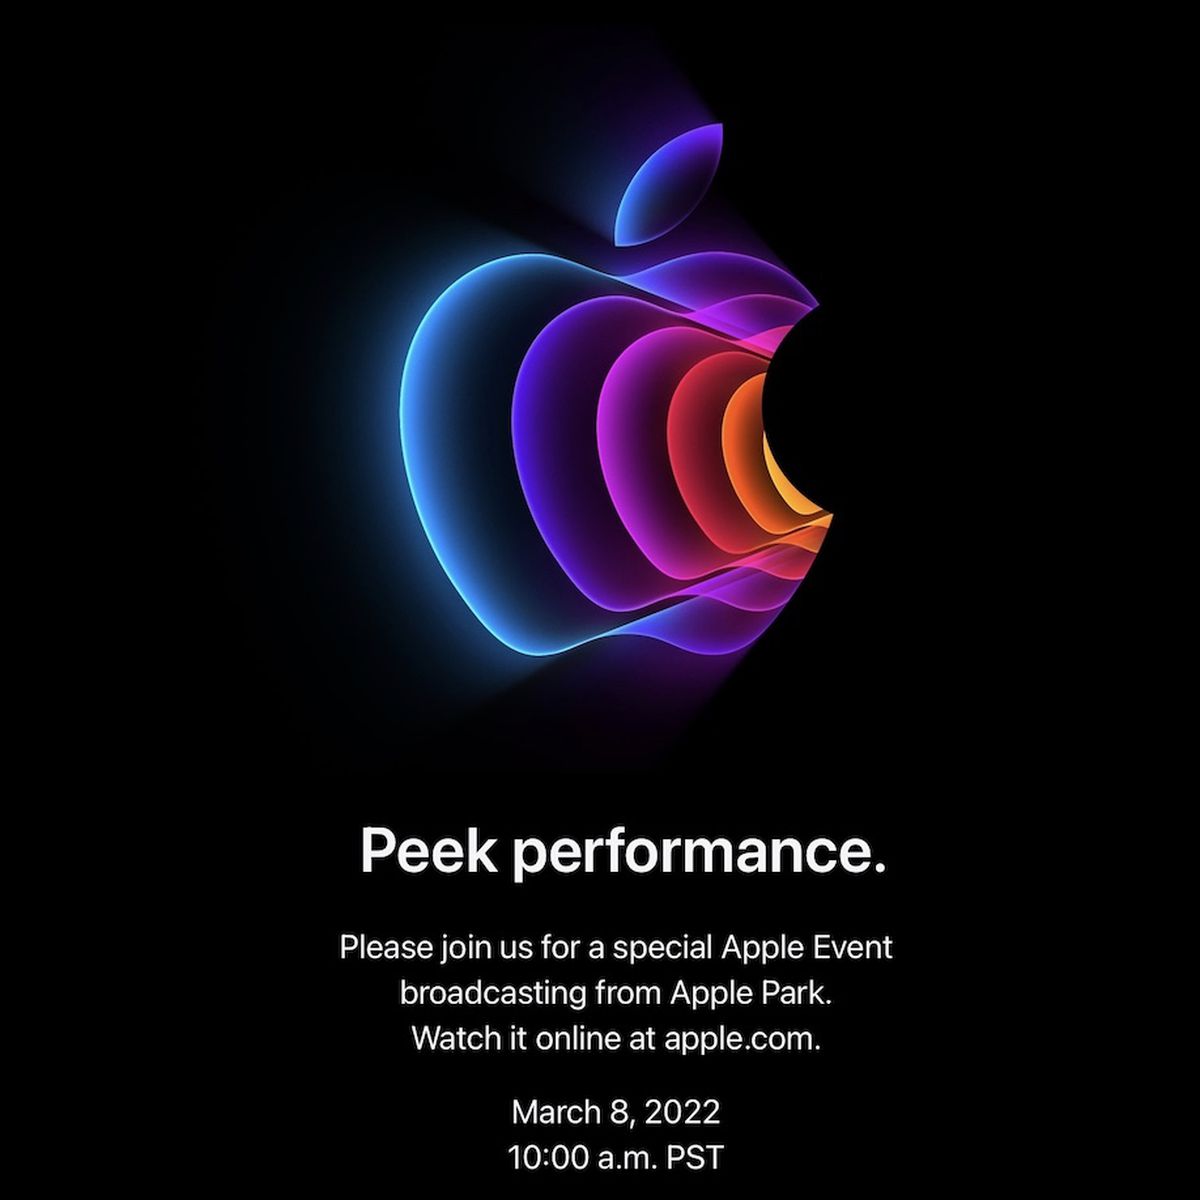 Apple Event Announced for March 8: 'Peek Performance' - MacRumors